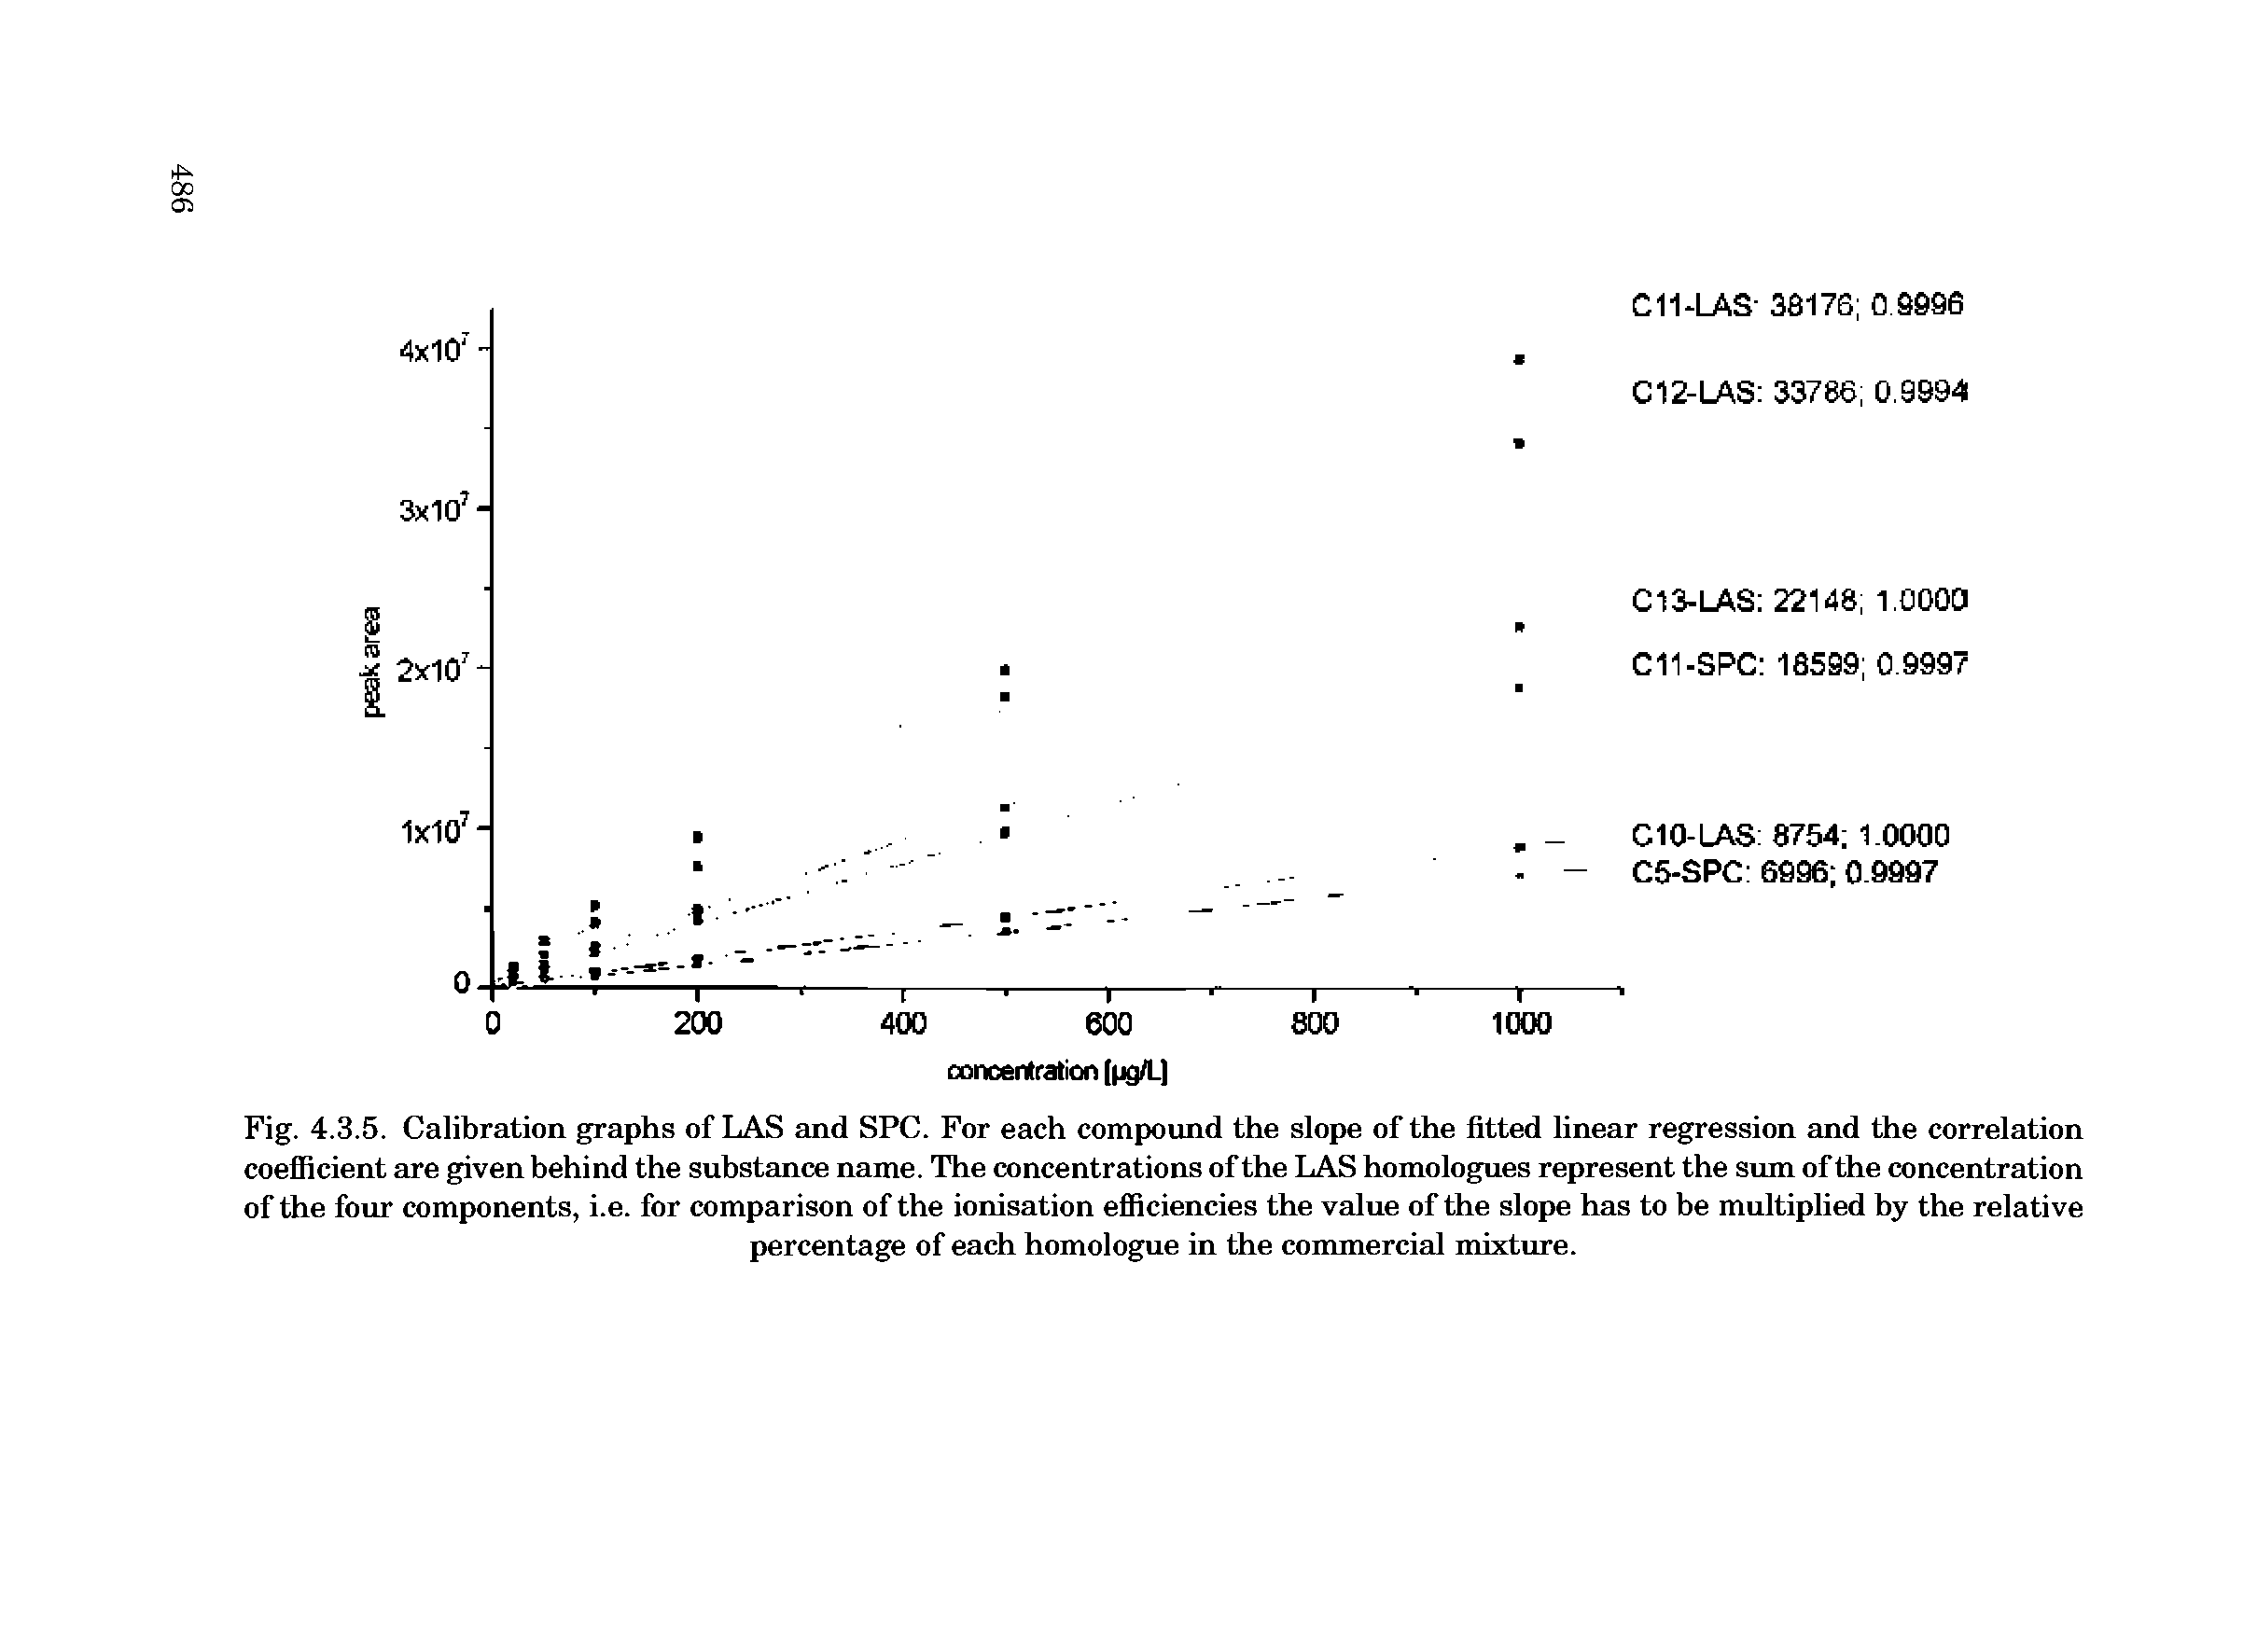 Fig. 4.3.5. Calibration graphs of LAS and SPC. For each compound the slope of the fitted linear regression and the correlation coefficient are given behind the substance name. The concentrations of the IAS homologues represent the sum of the concentration of the four components, i.e. for comparison of the ionisation efficiencies the value of the slope has to be multiplied by the relative...